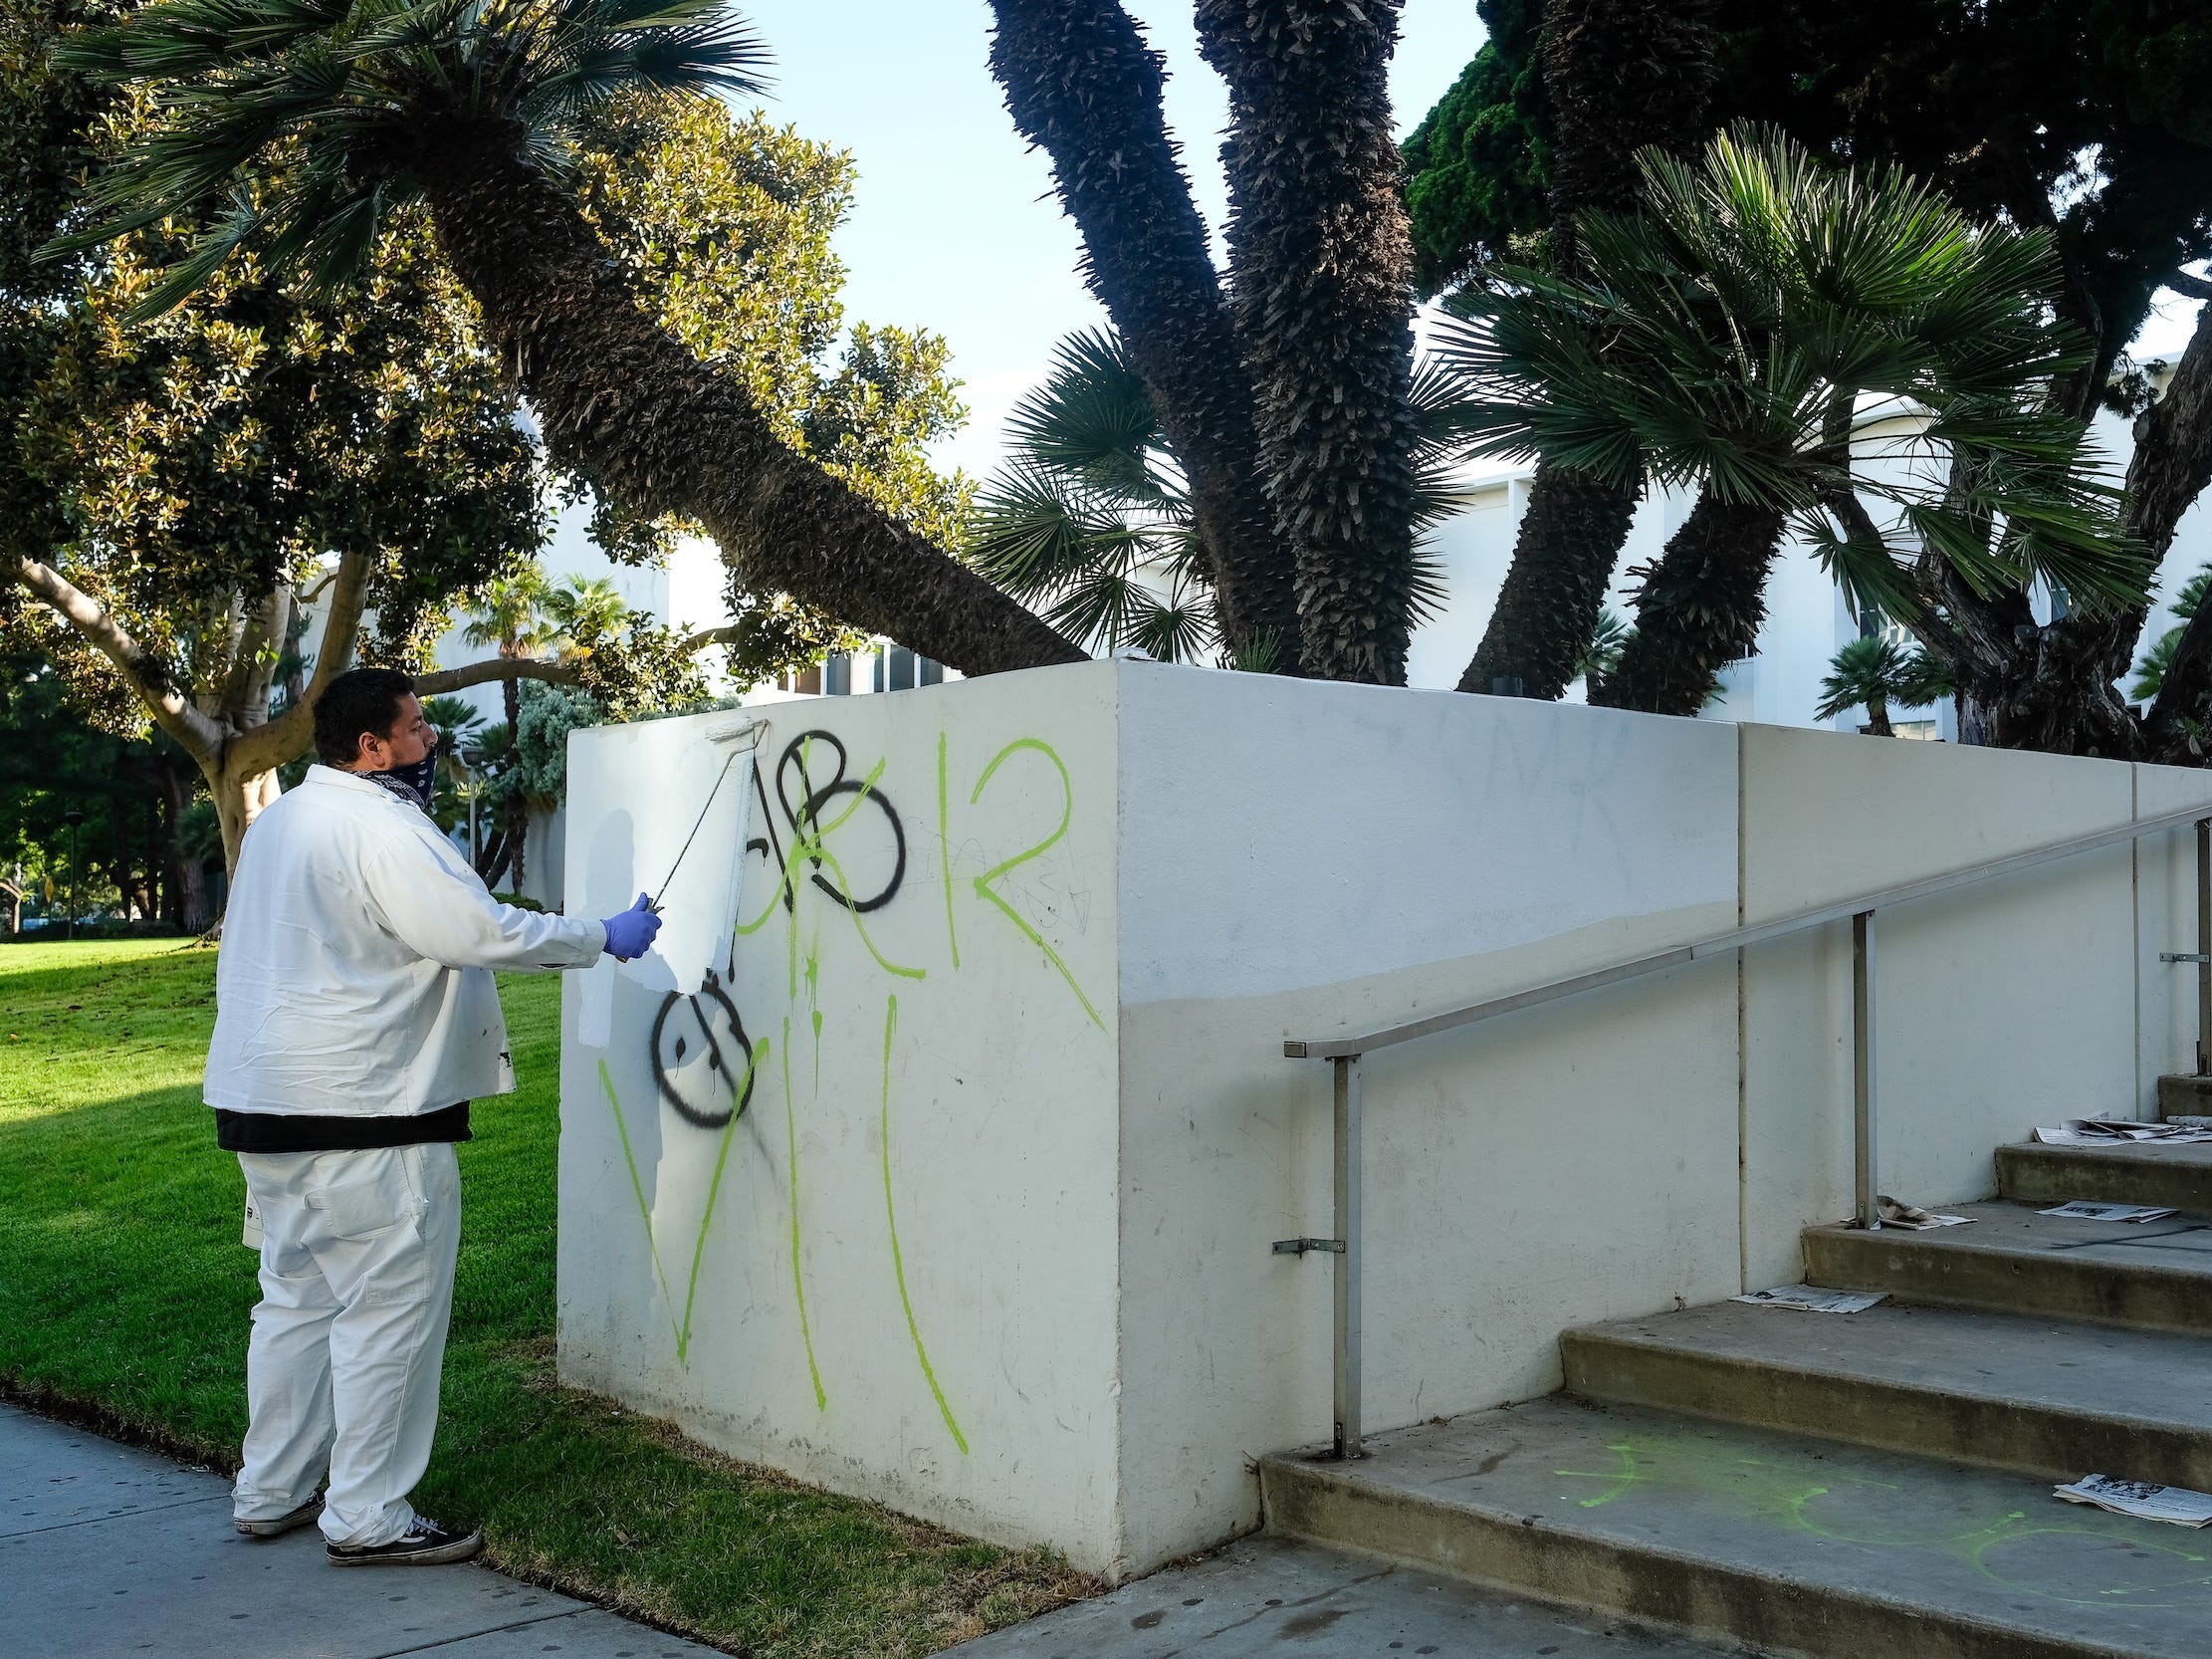 cleaning courthouse graffiti LA protests photo by Stacey Leasca